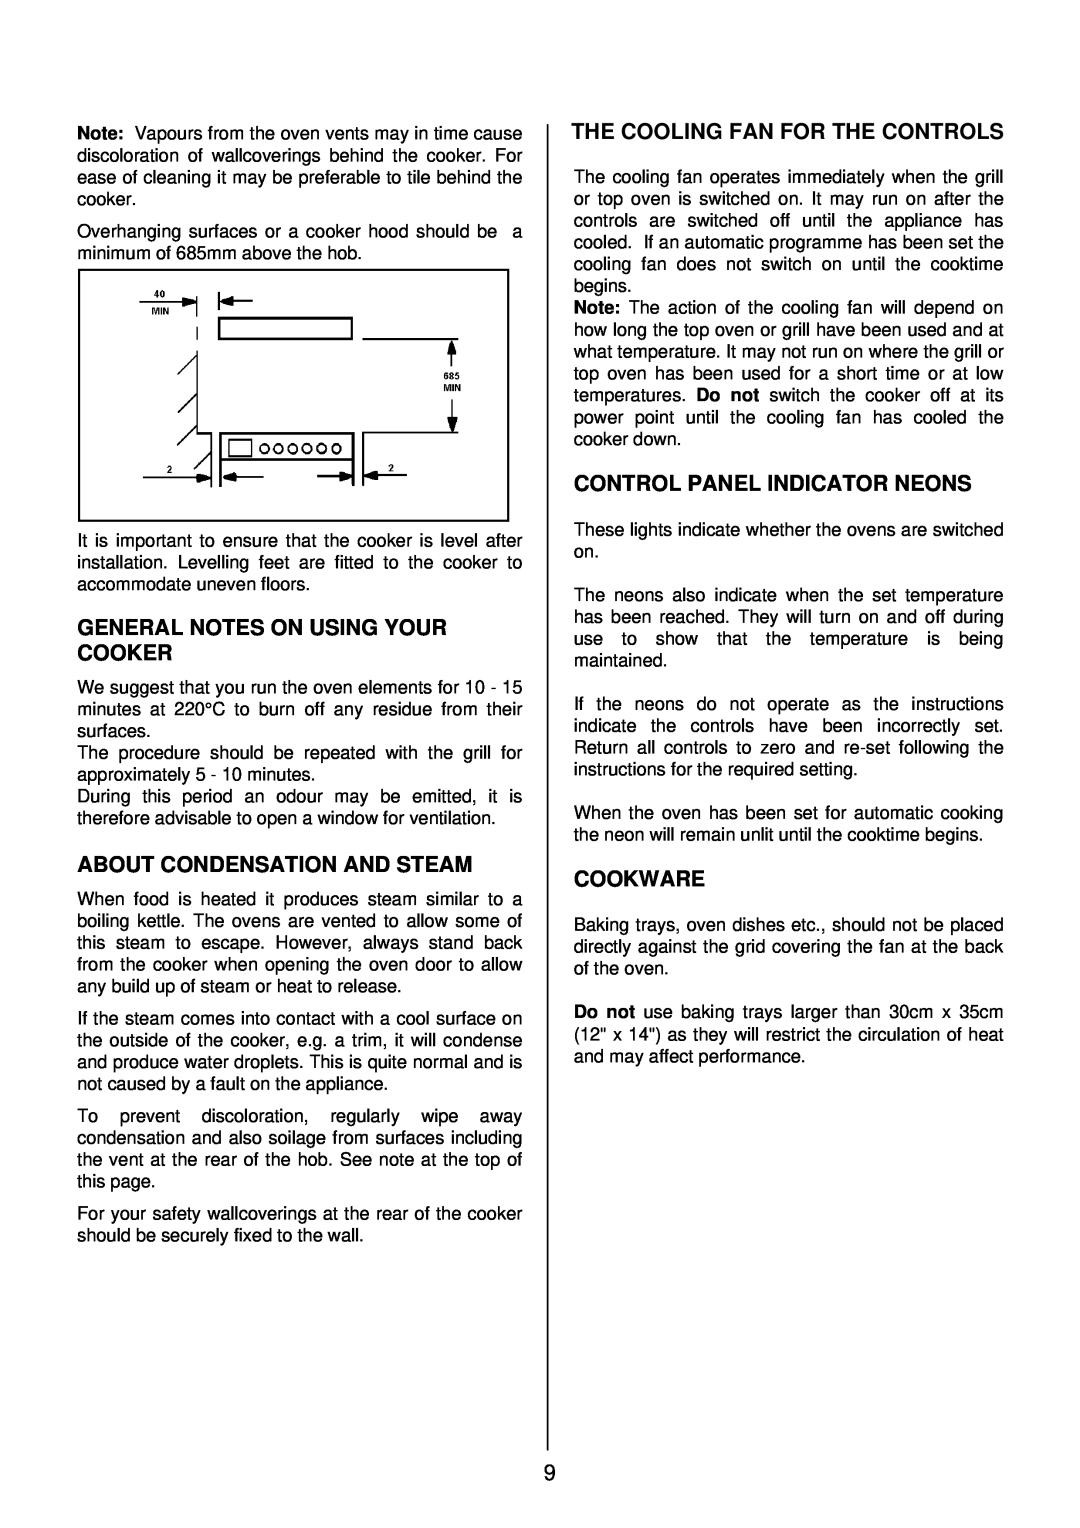 Tricity Bendix SIE 532 General Notes On Using Your Cooker, About Condensation And Steam, The Cooling Fan For The Controls 